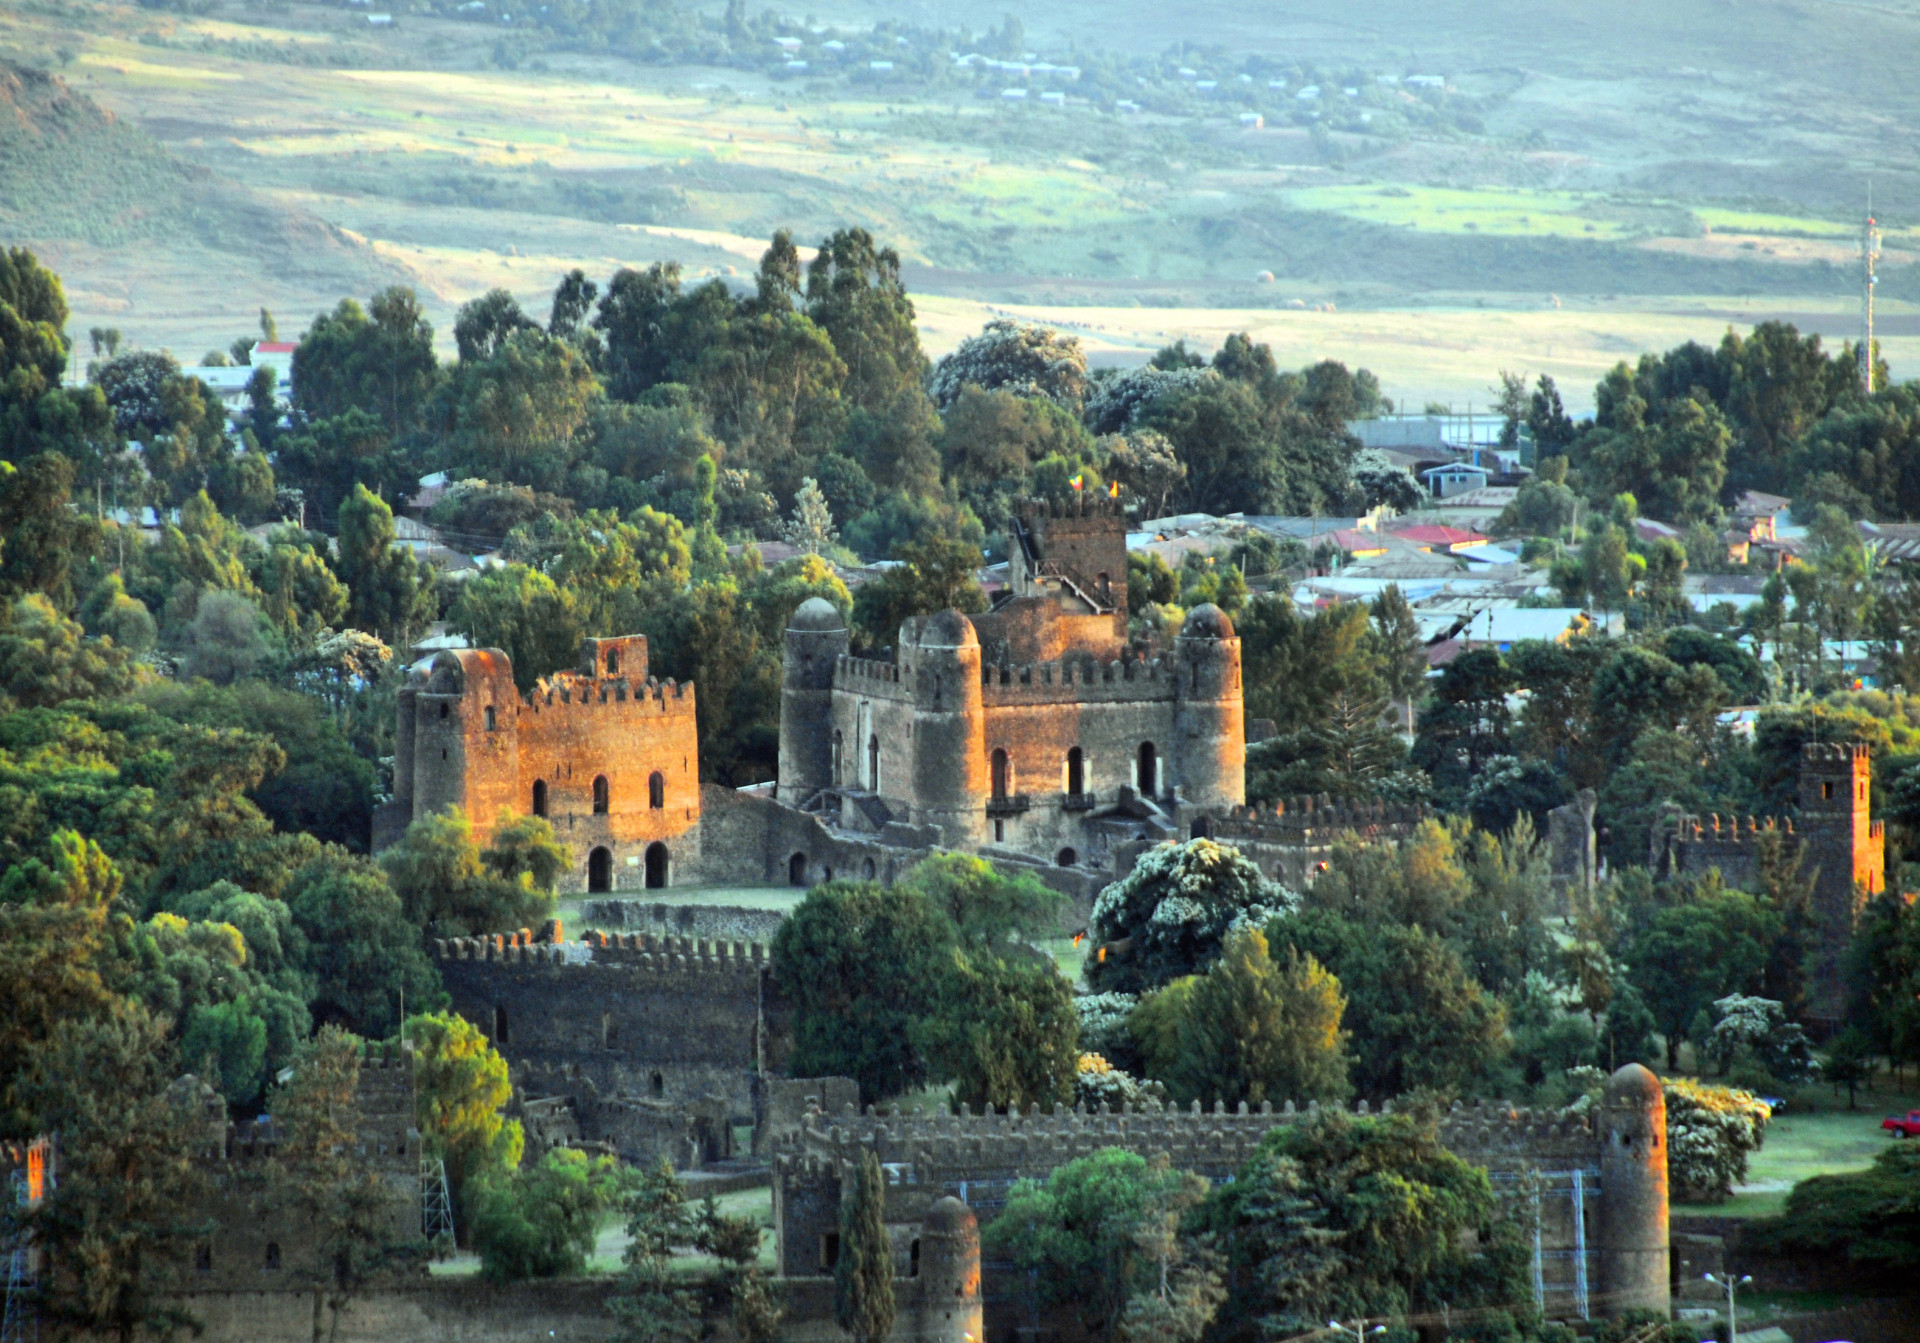 <p>Ethiopia is home to a series of ancient and historical sites, including the famous rock-cut monolithic churches of Lalibela.</p><p><a href="https://www.msn.com/en-us/community/channel/vid-7xx8mnucu55yw63we9va2gwr7uihbxwc68fxqp25x6tg4ftibpra?cvid=94631541bc0f4f89bfd59158d696ad7e">Follow us and access great exclusive content every day</a></p>